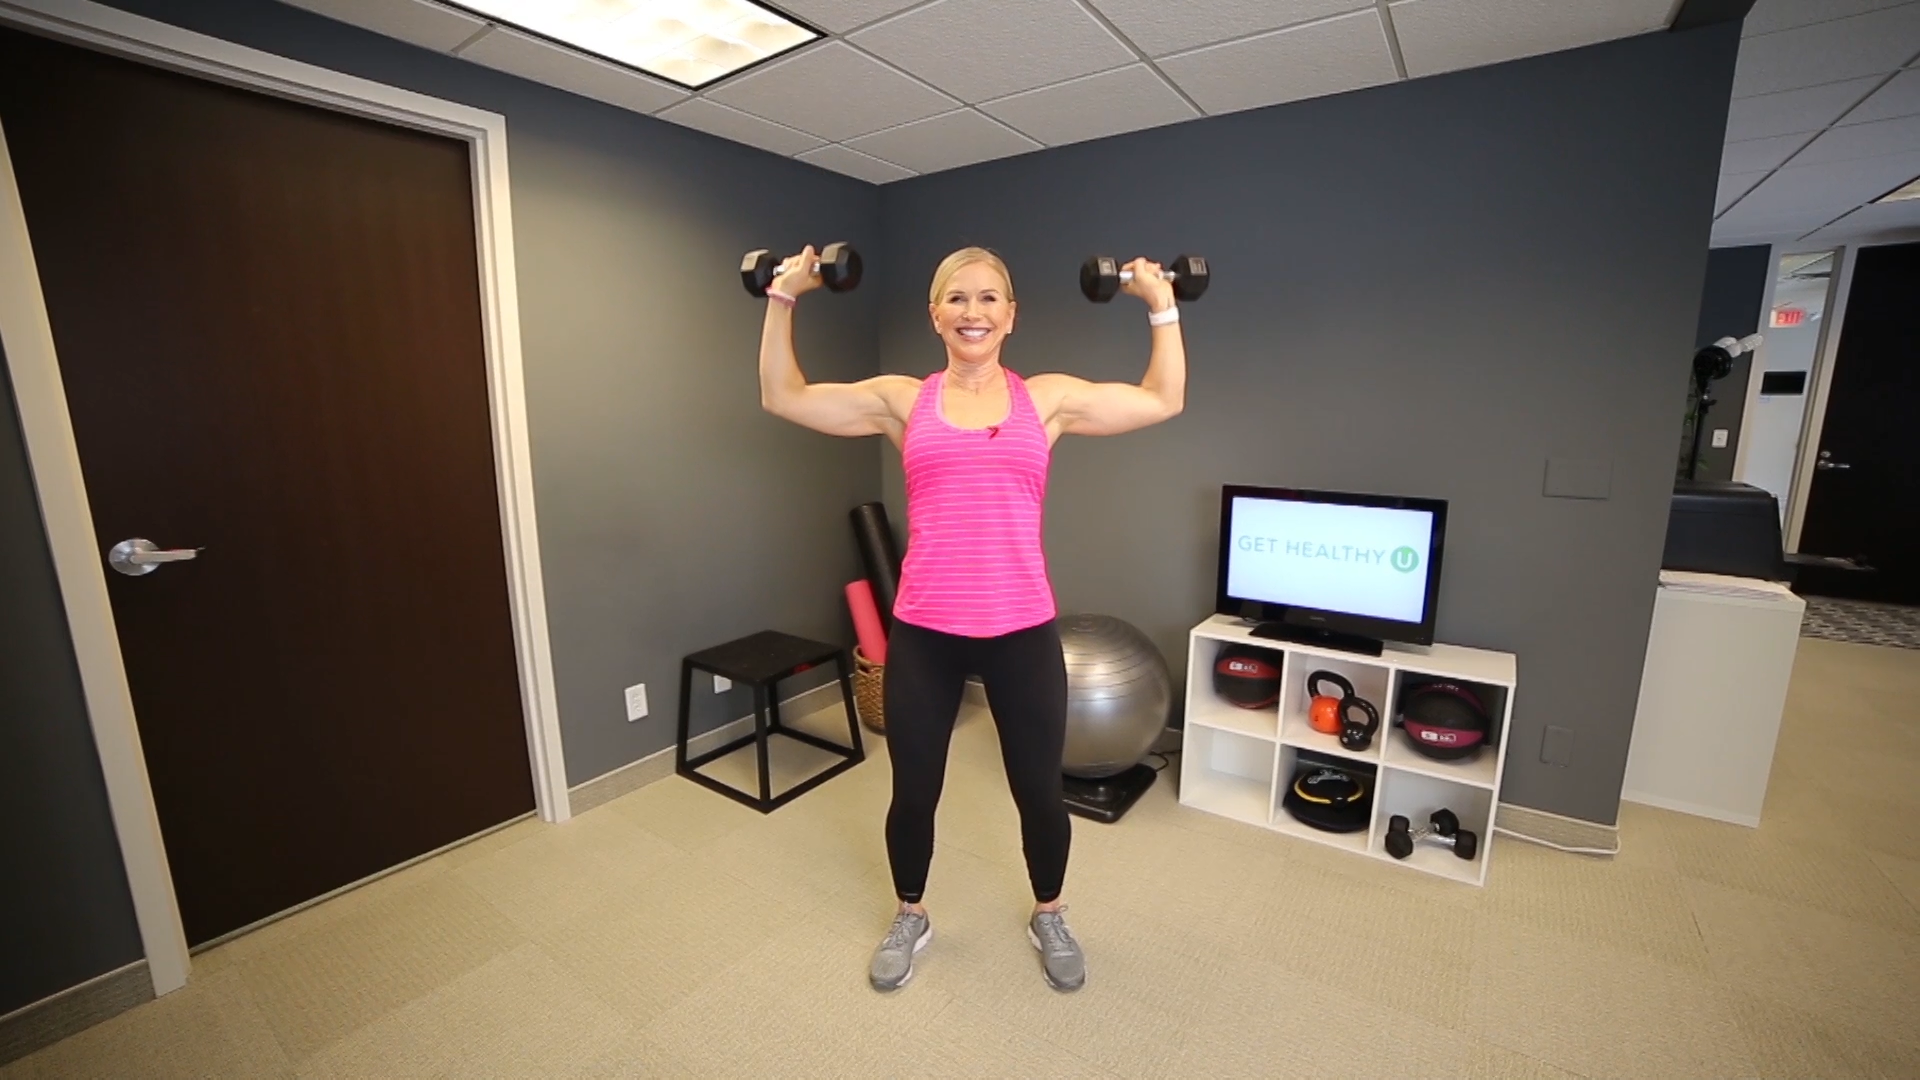 Woman in a pink shirt lifting dumbbells